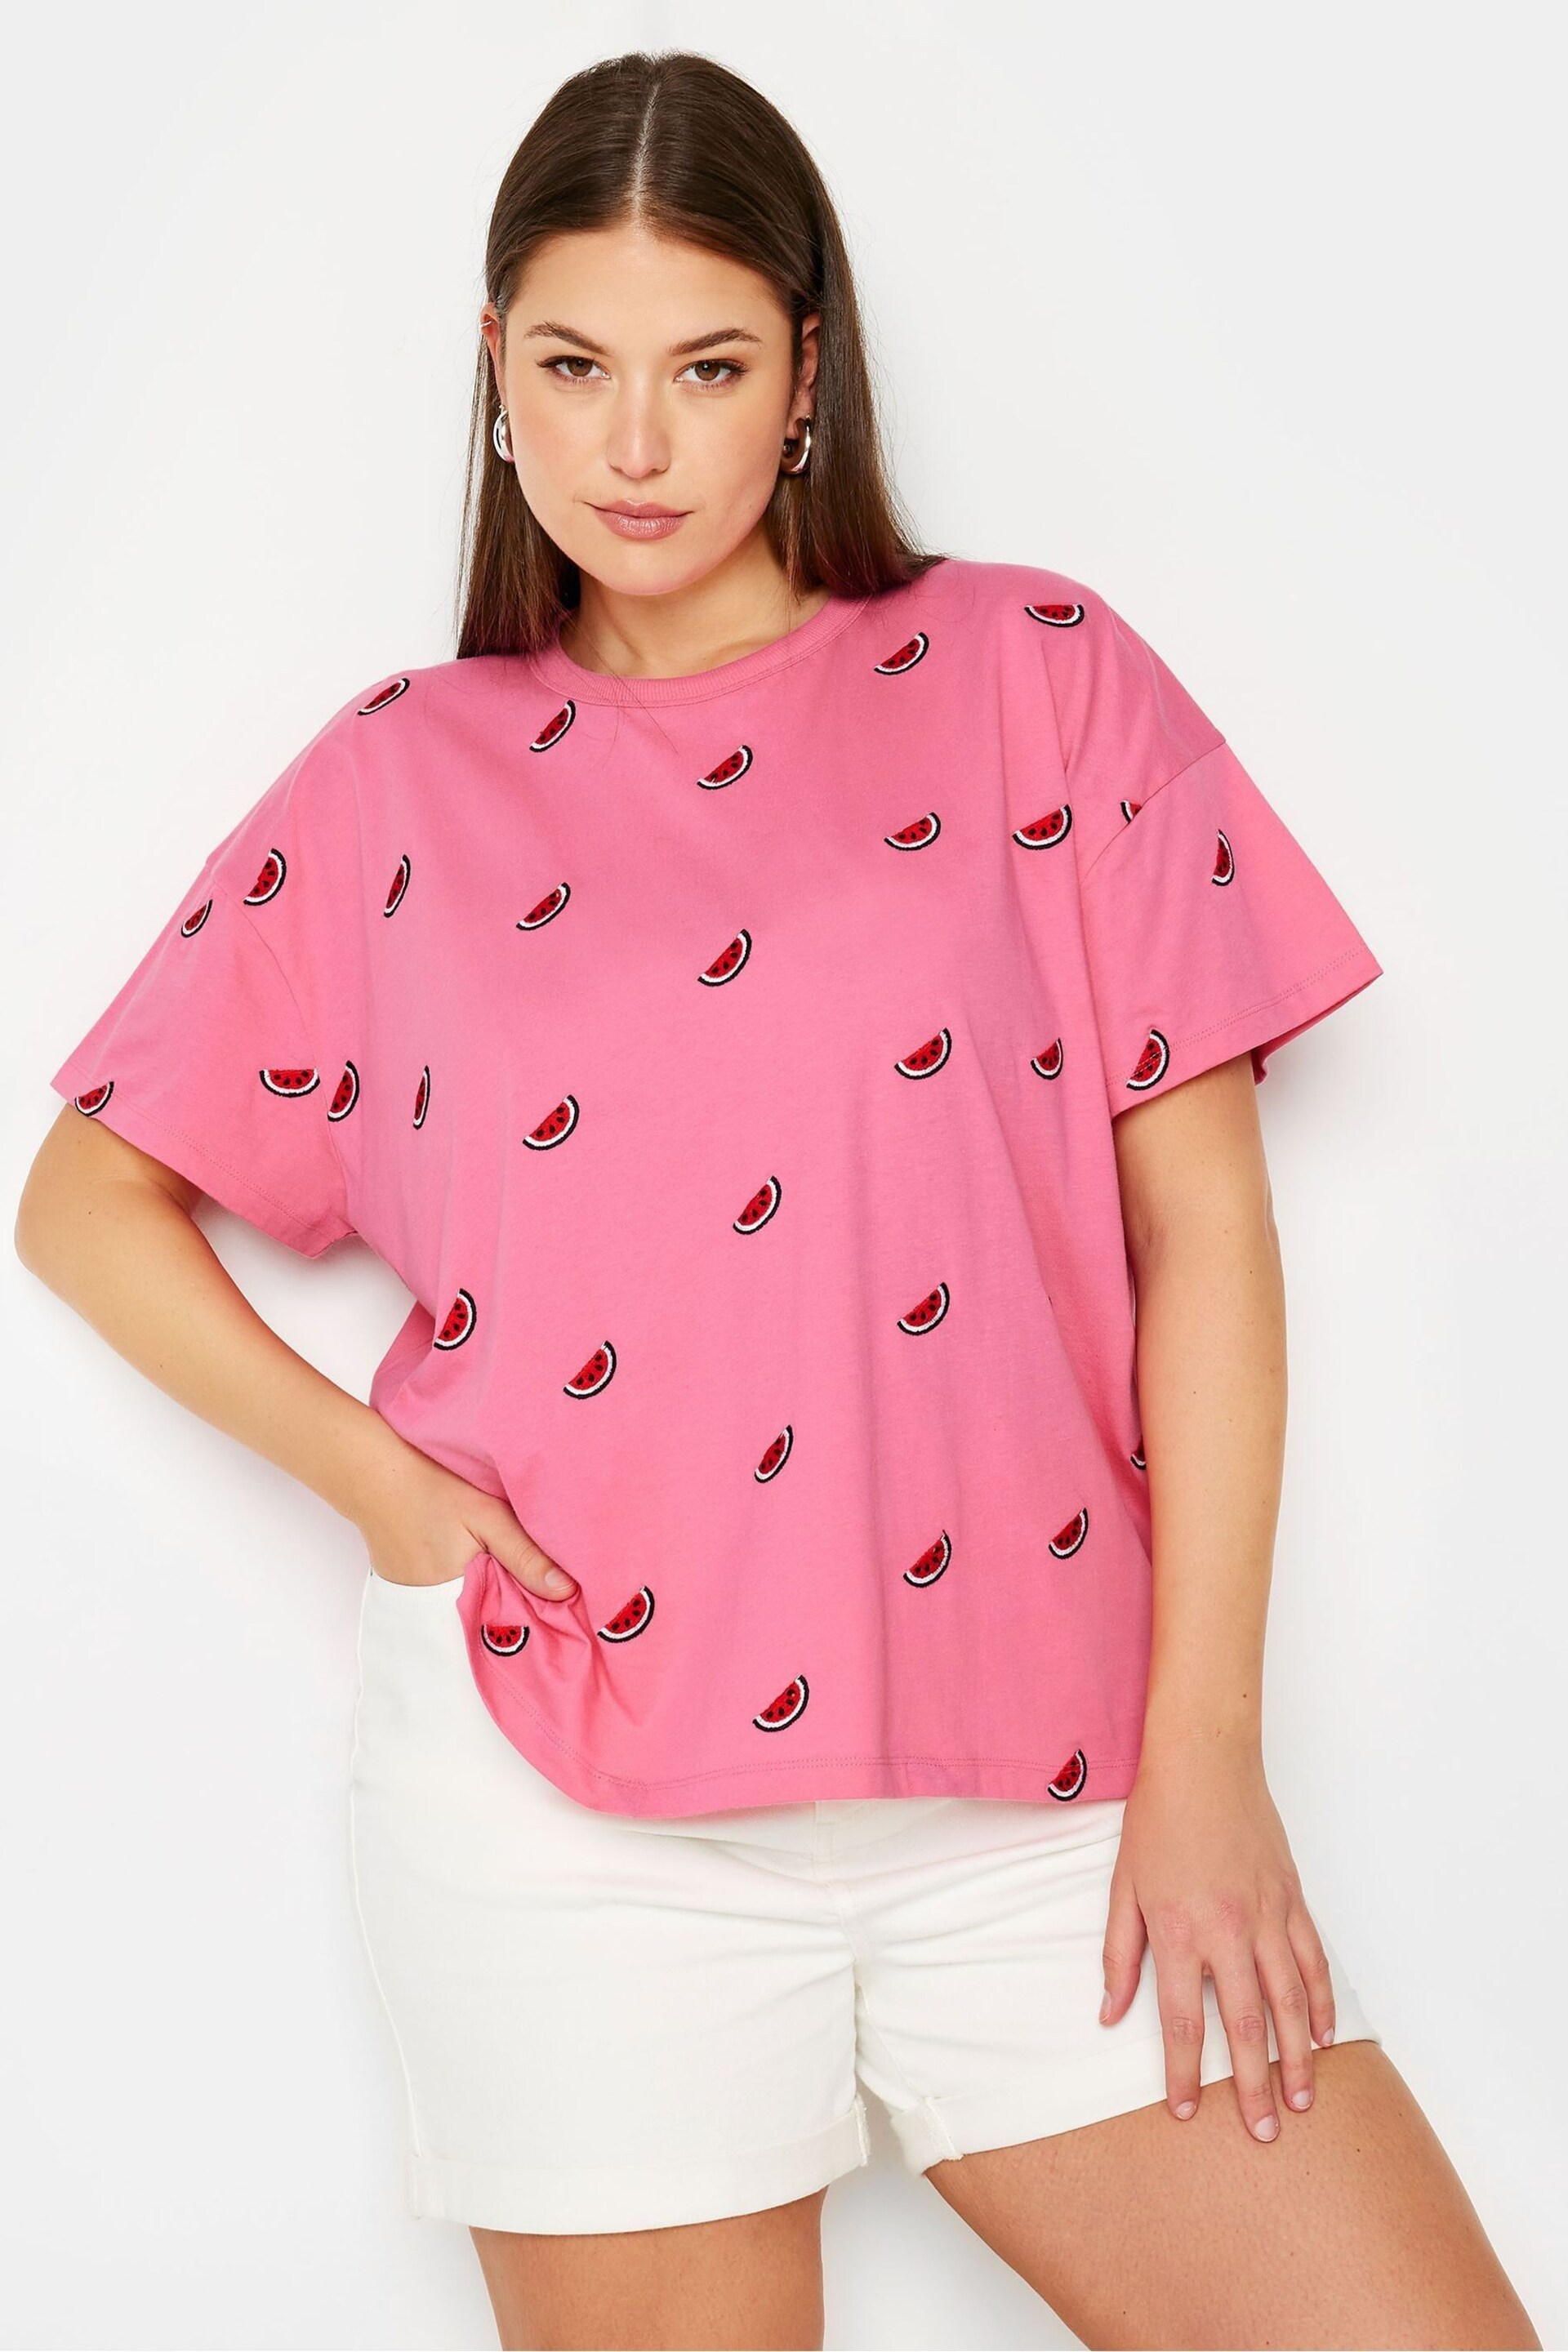 Yours Curve Pink LIMITED COLLECTIONEmbroidered Watermelon T-Shirt - Image 1 of 5